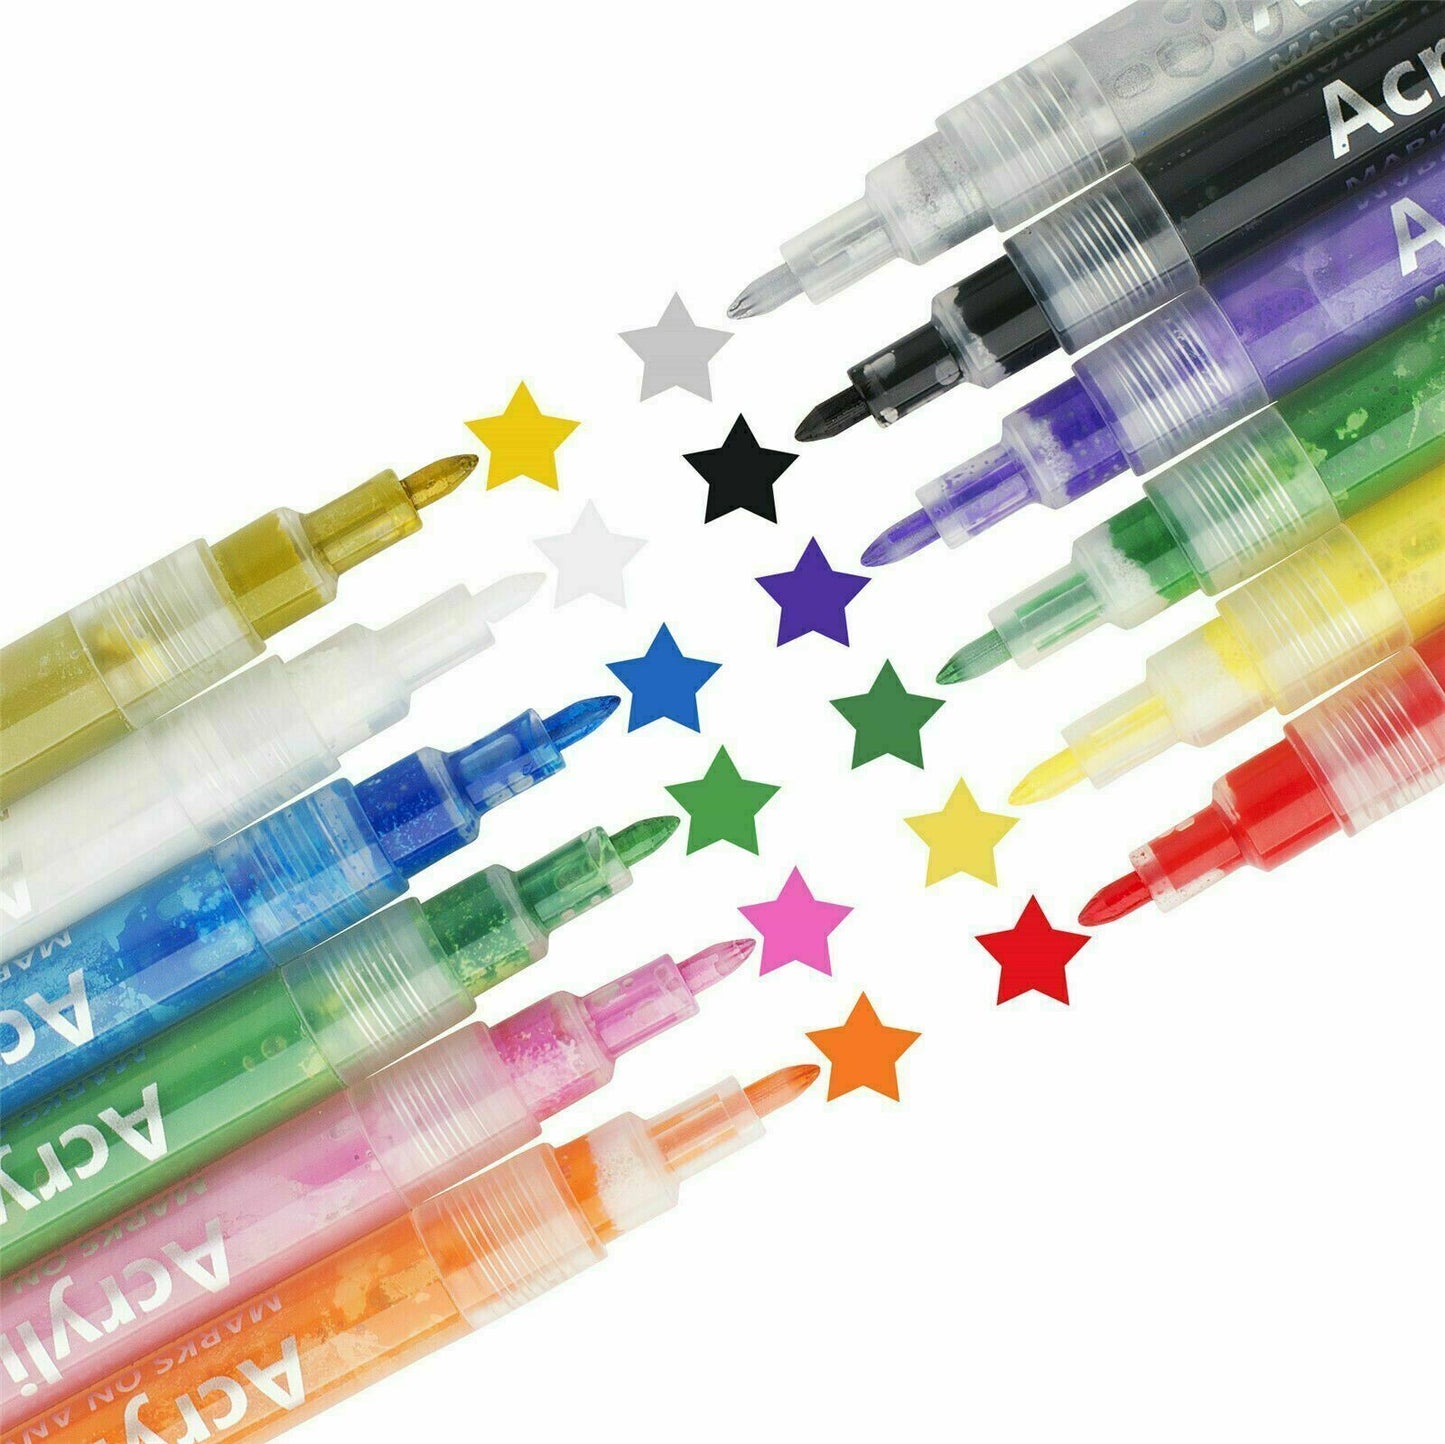 24 Colours Acrylic Paint Pens For Rock Painting Stone Ceramic Glass Rock Markers